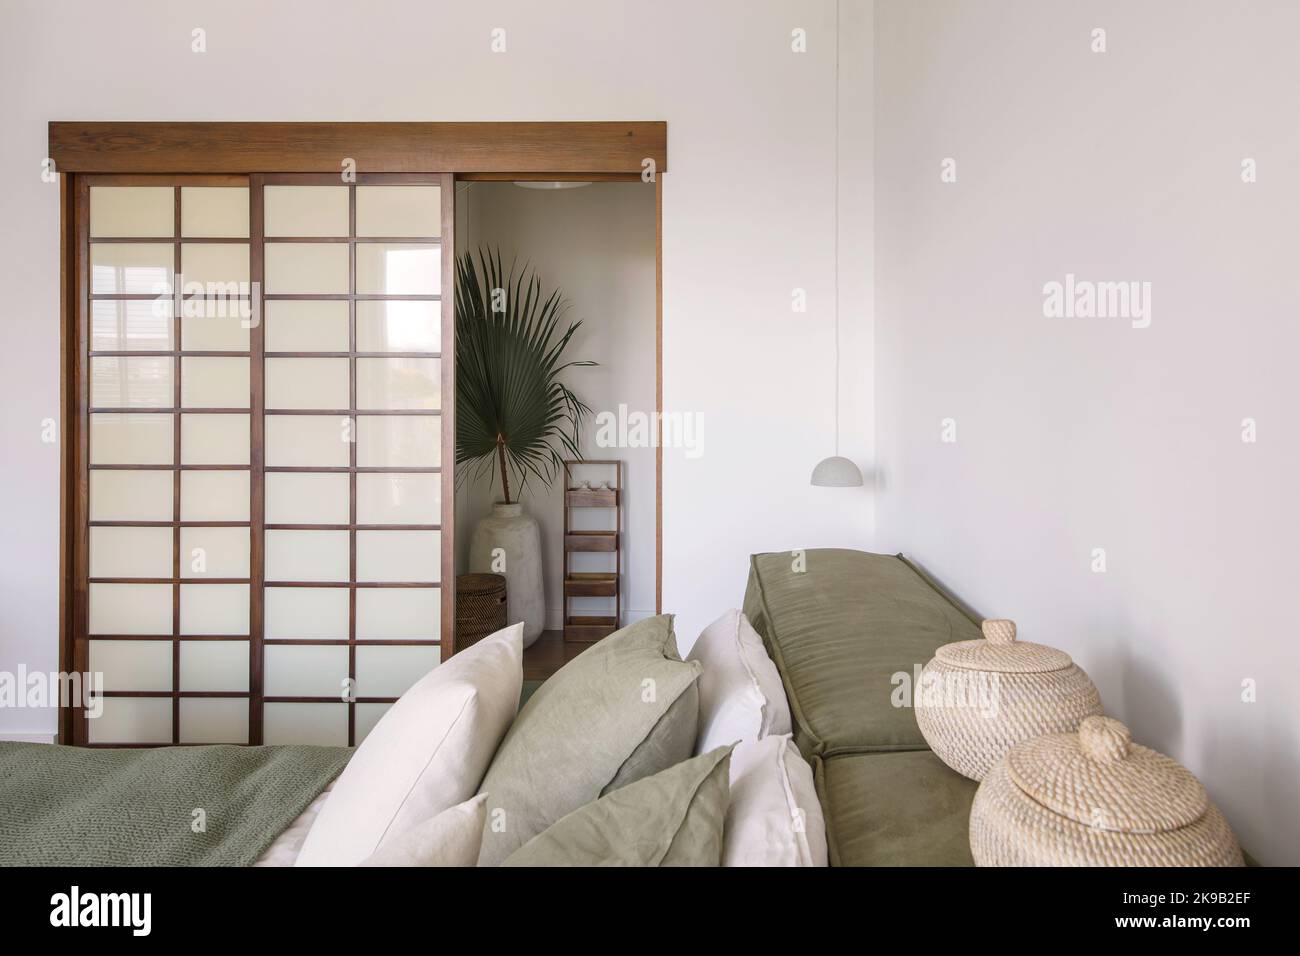 Modern Japandi bedroom interior design in earth tones, natural textures with wooden solid oak furniture. Japandi concept Stock Photo